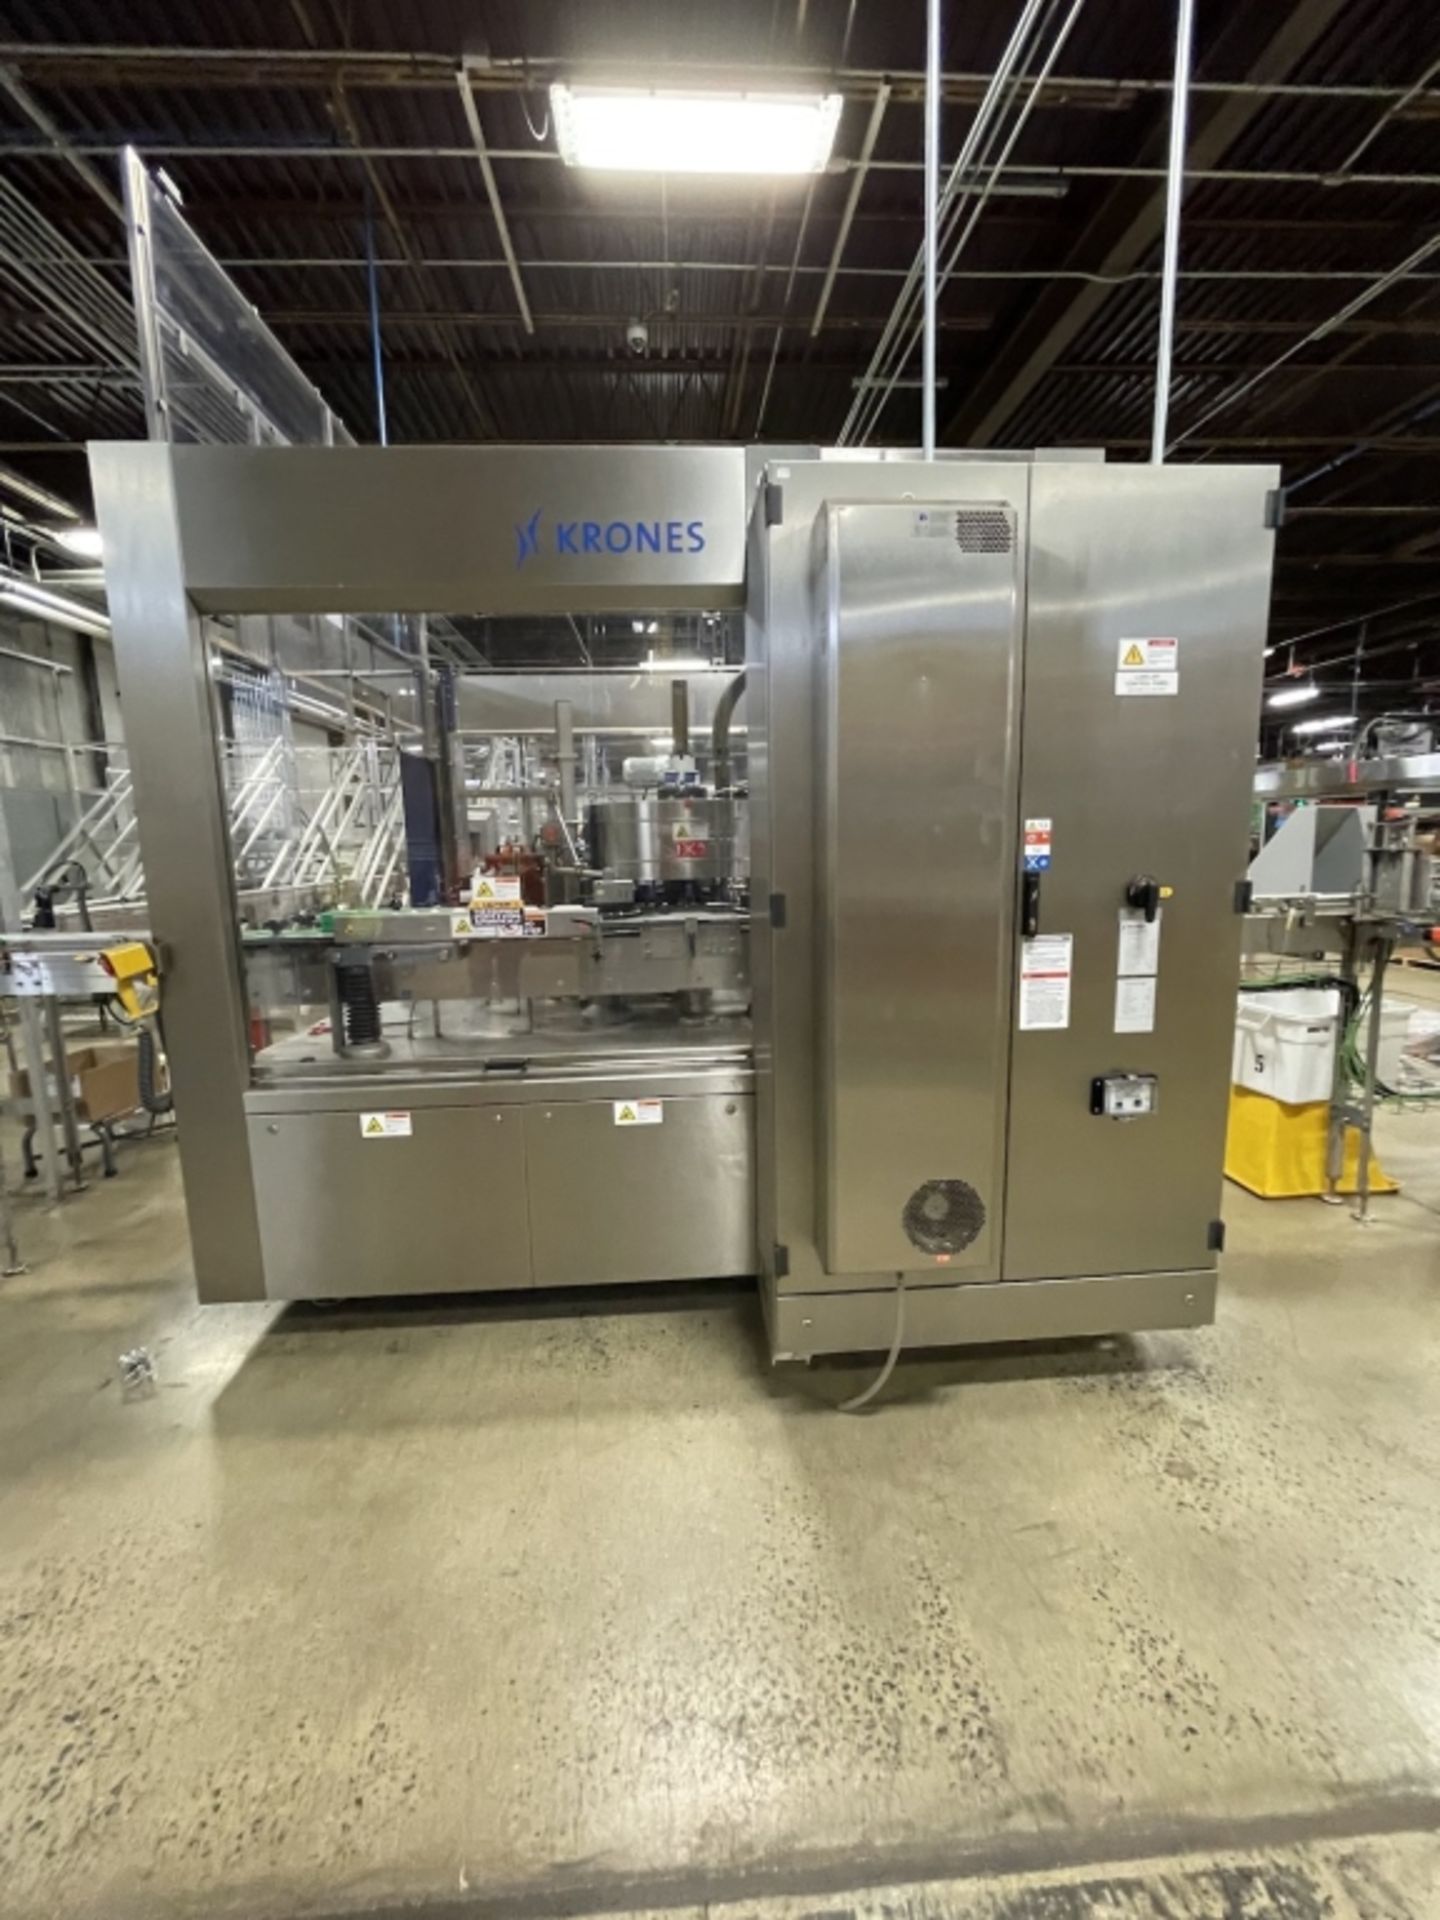 KRONES CONTIROLL ROLL-FED WRAP AROUND LABELER, S/N K745X66, 340 MM MAX LABEL LENGTH, 175 MIN LABEL - Image 4 of 11